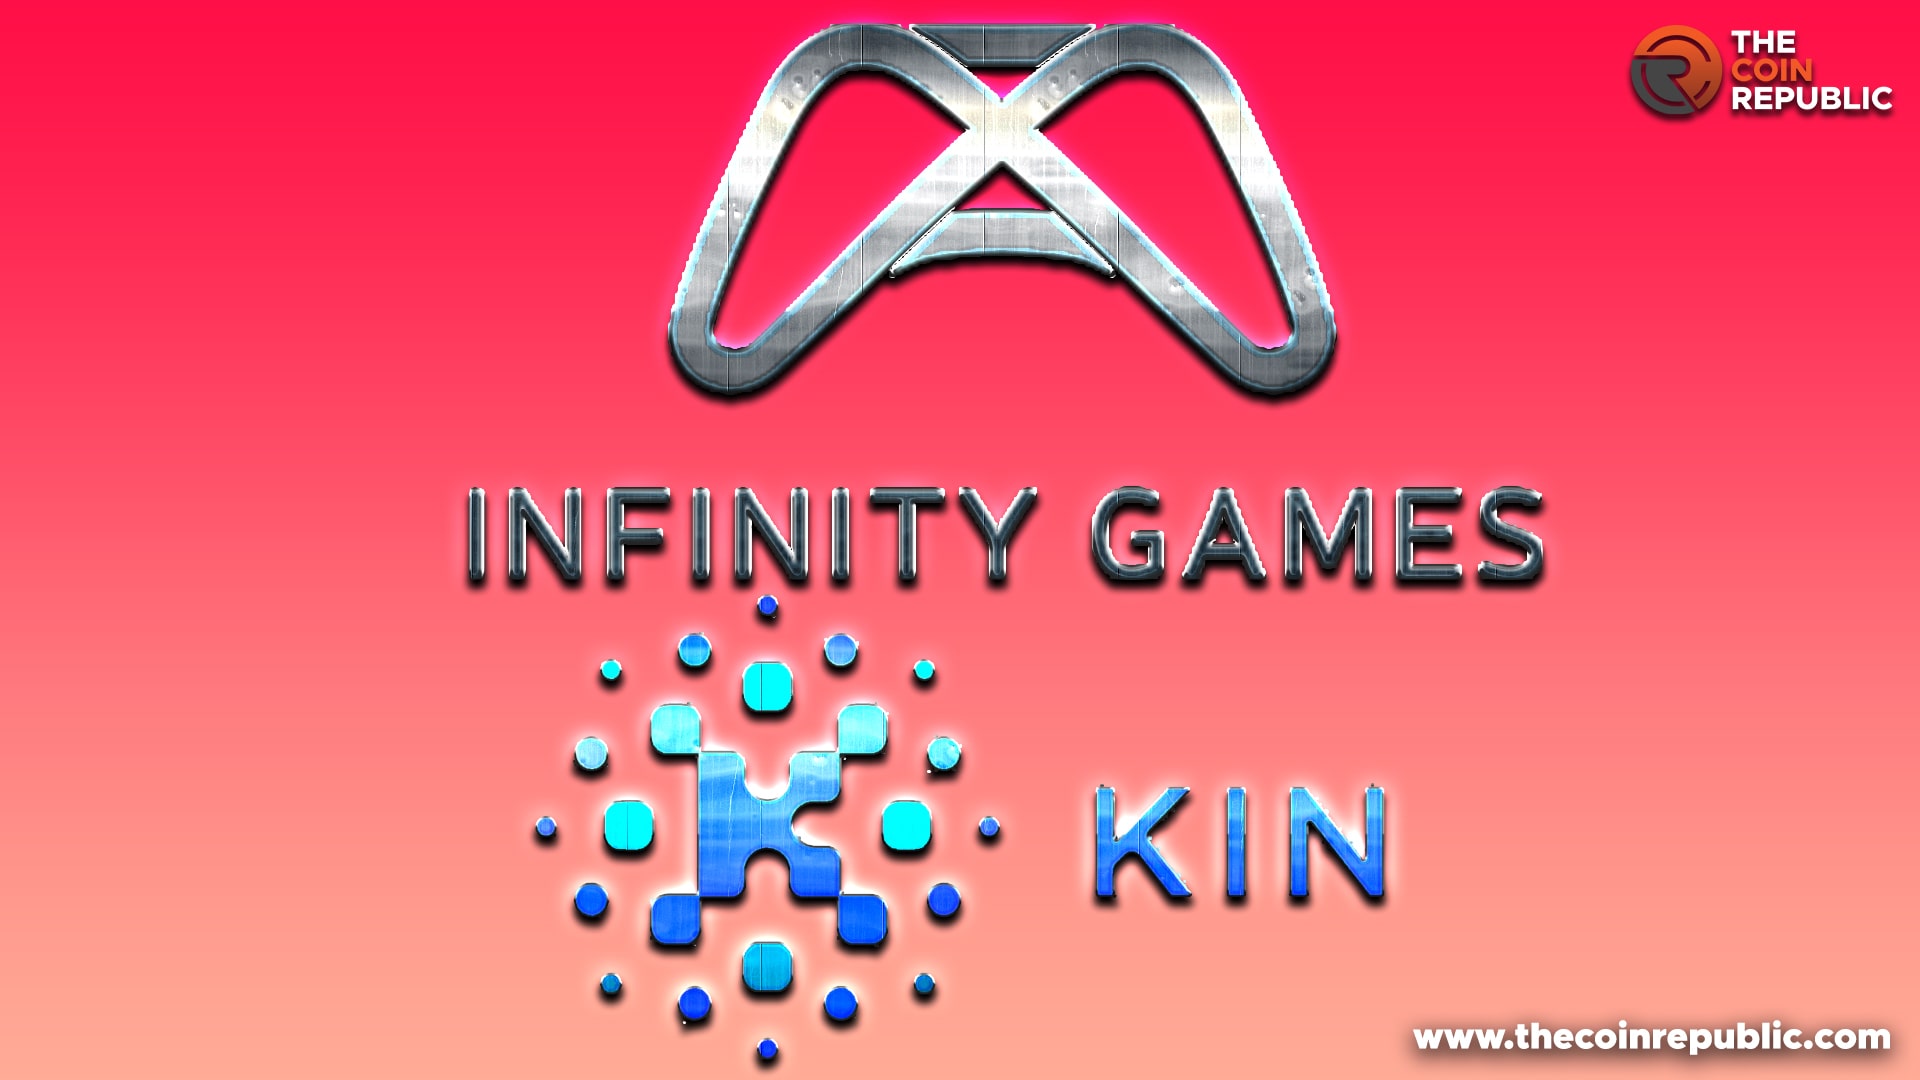 Infinity Game’s New Partnership for Unity Gaming